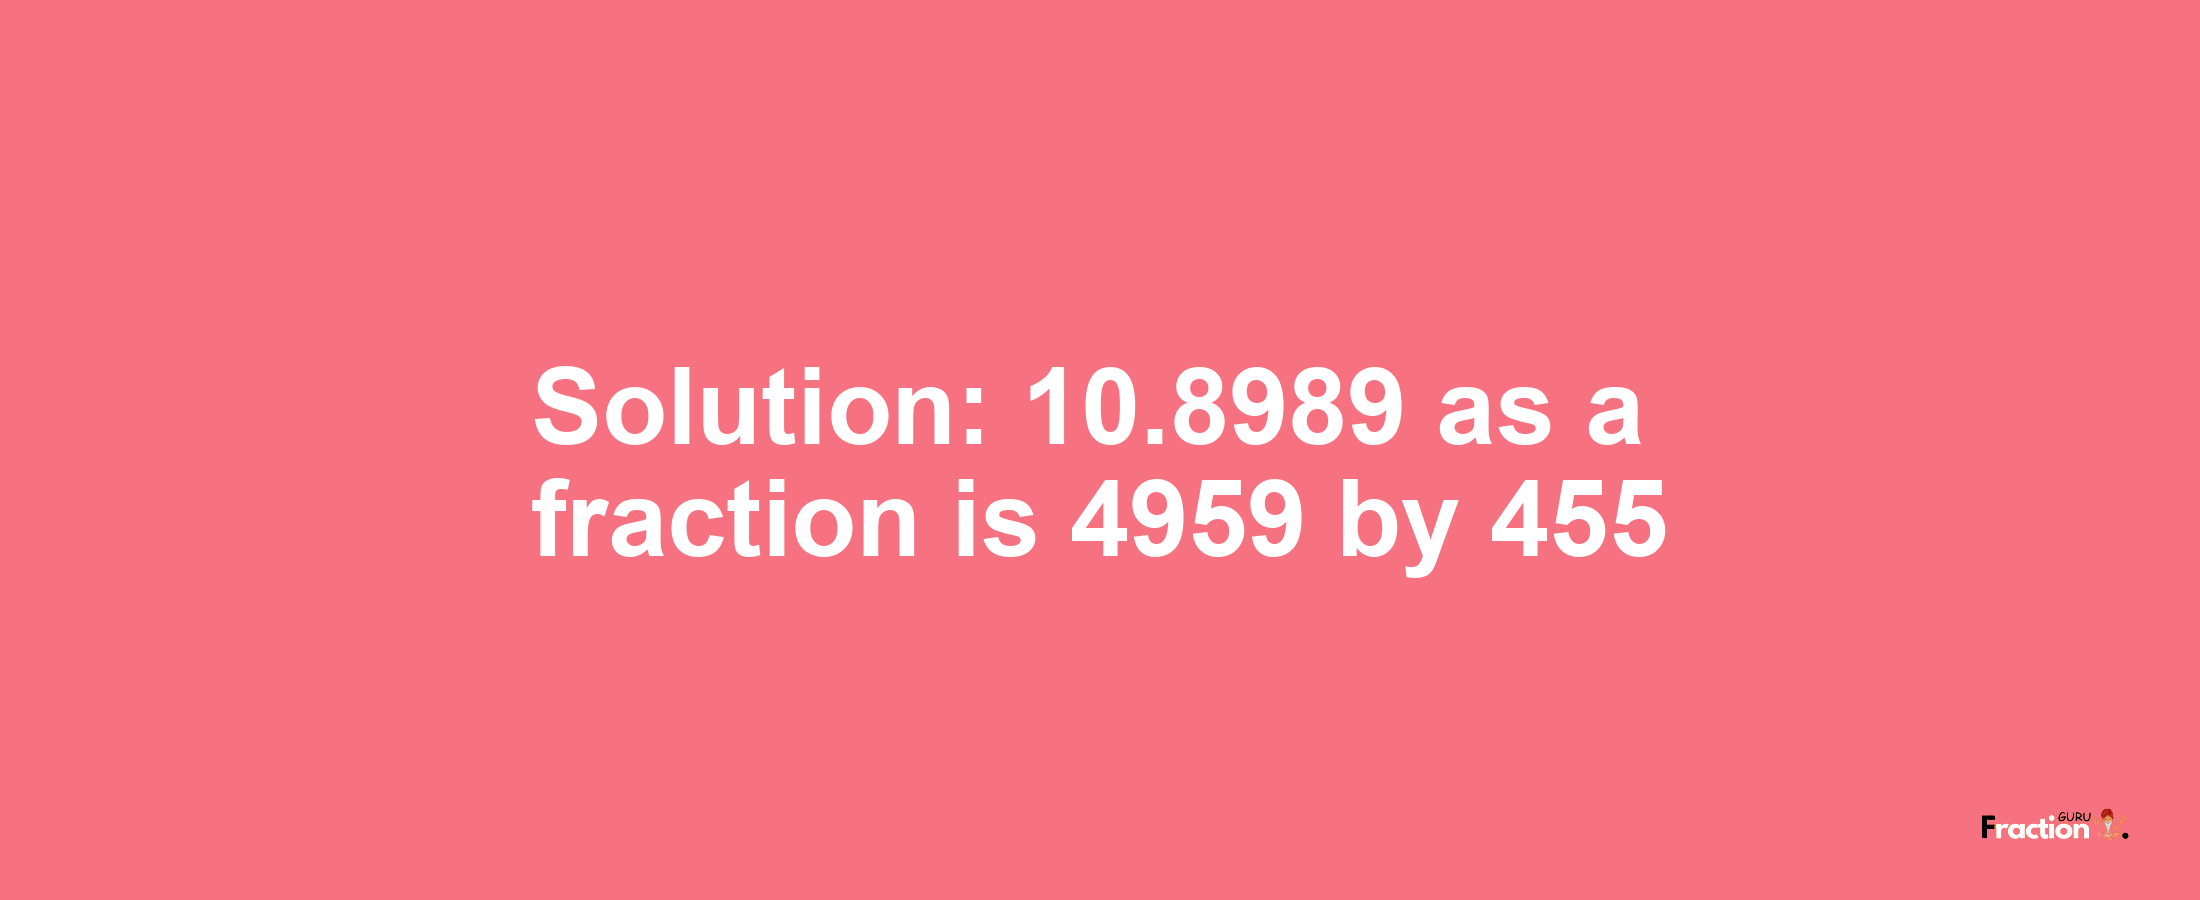 Solution:10.8989 as a fraction is 4959/455